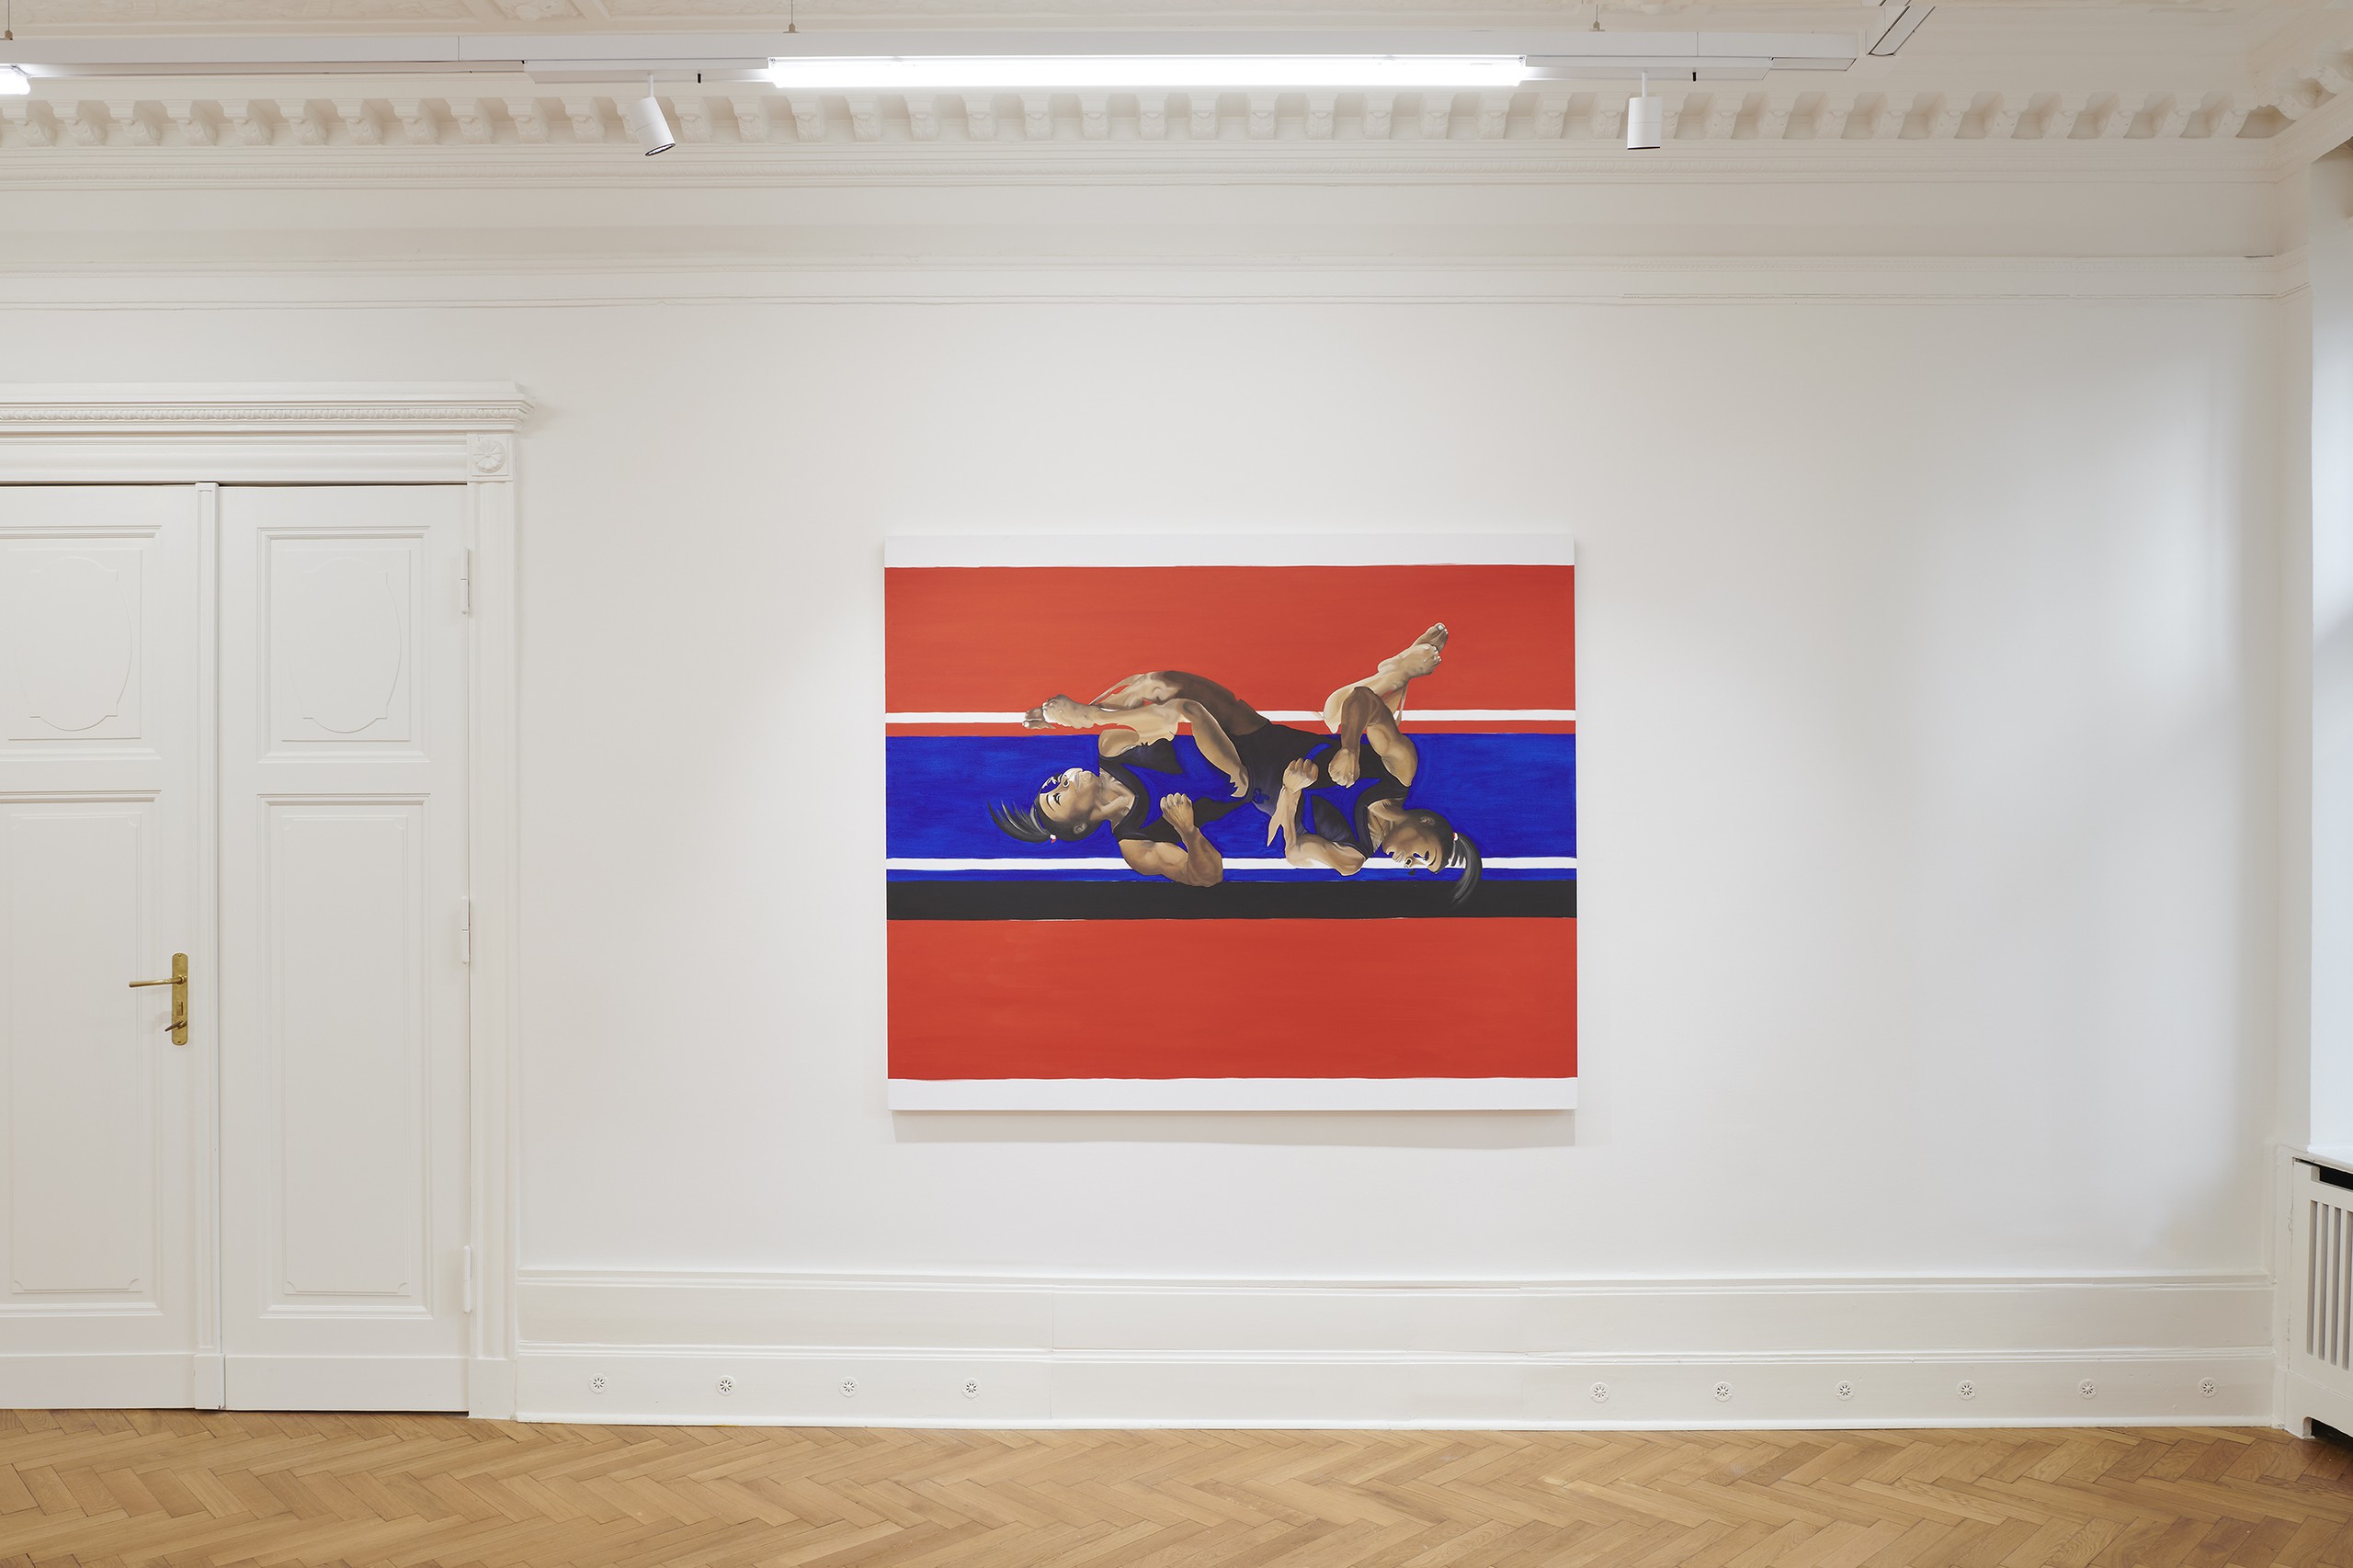 Installation view, Wash Us With Fire, Société, Berlin, 2021